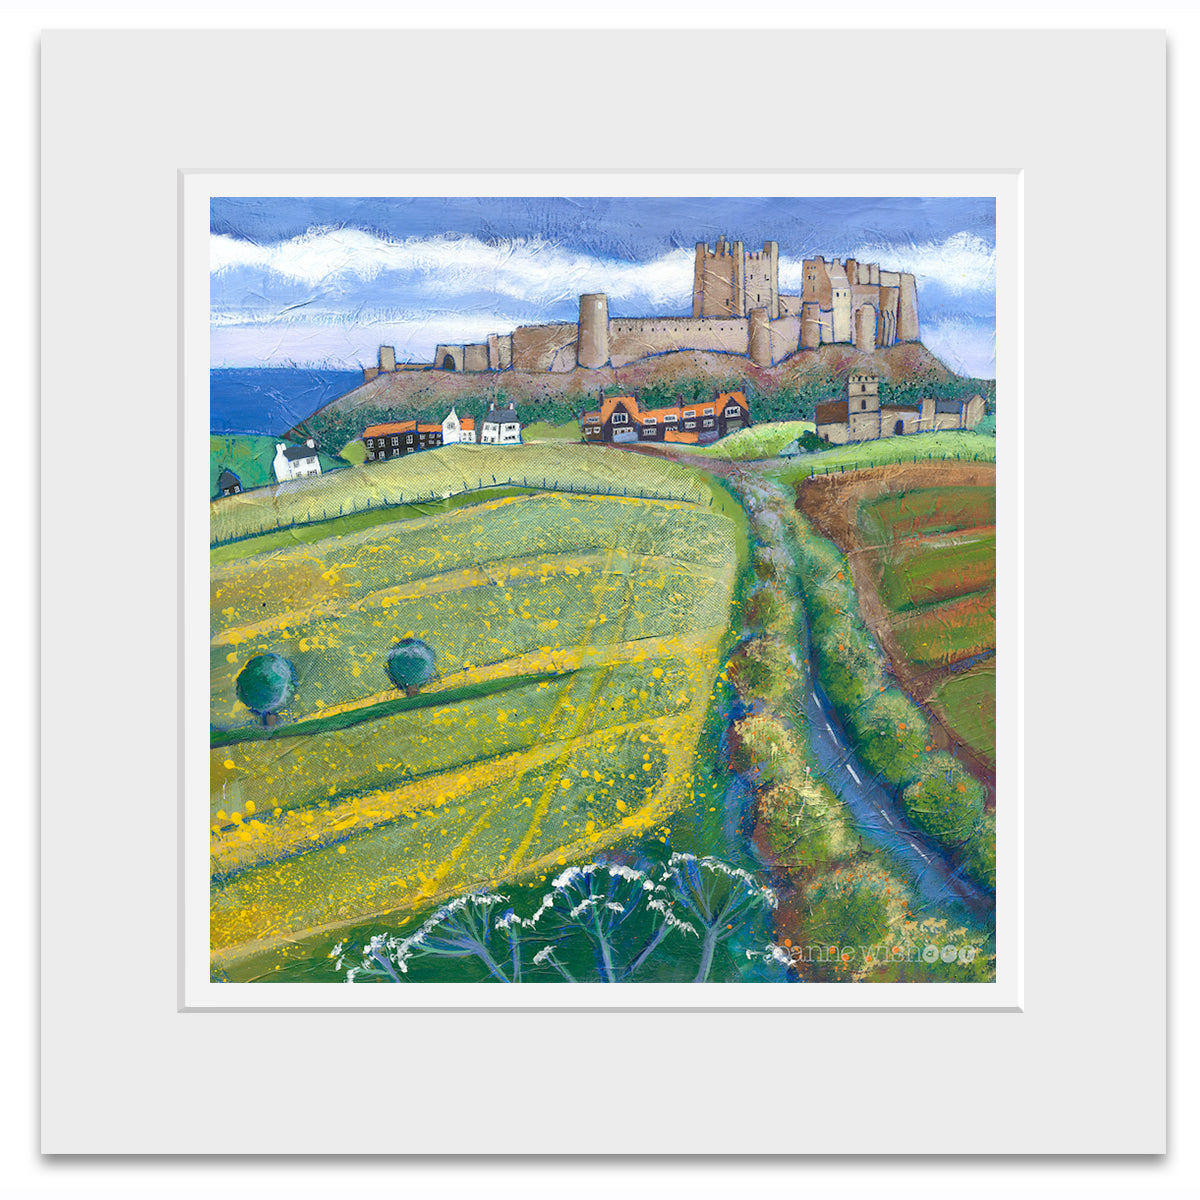 A mounted print of Bamburgh castle with a bright yellow field of flowers dominating the foreground.